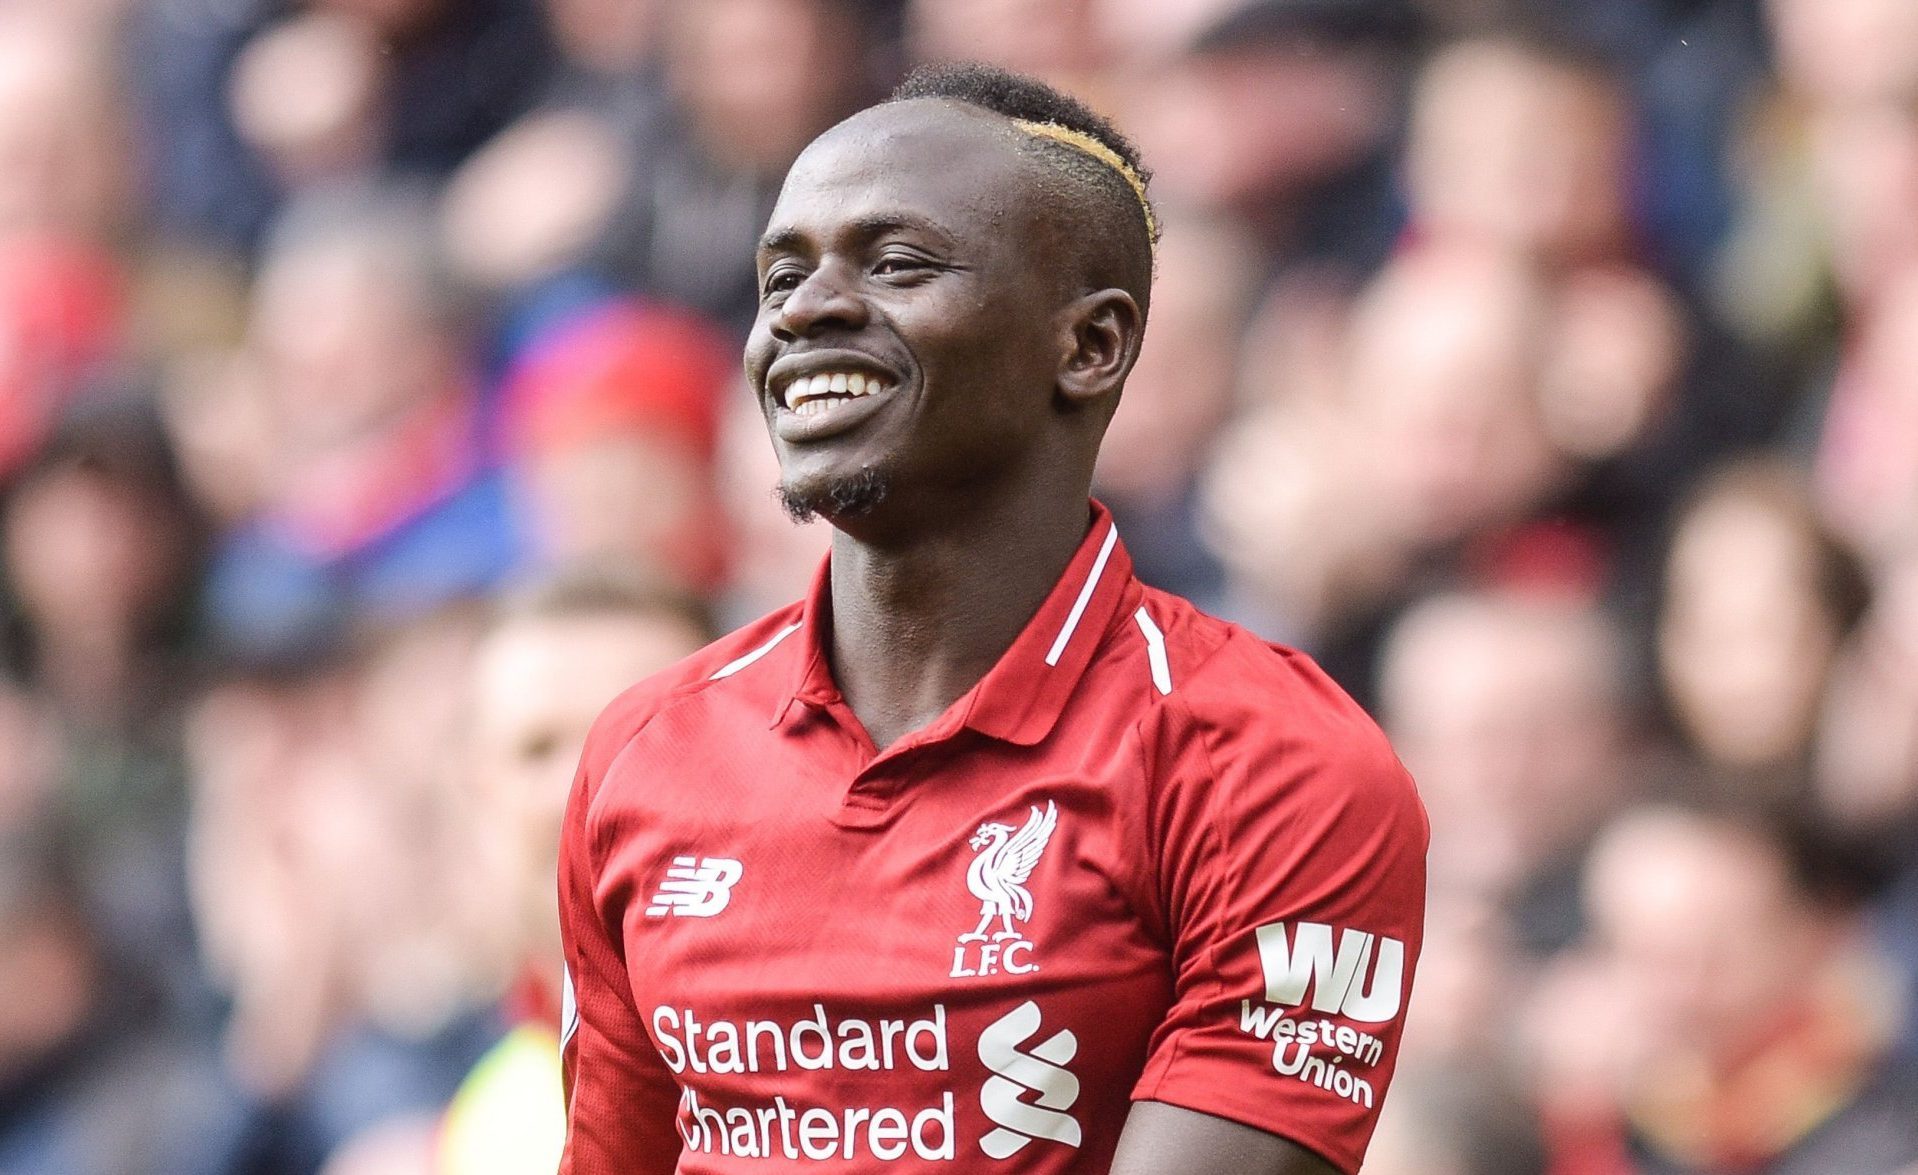 Breaking: Liverpool forward, Sadio Mané tested positive to COVID-19